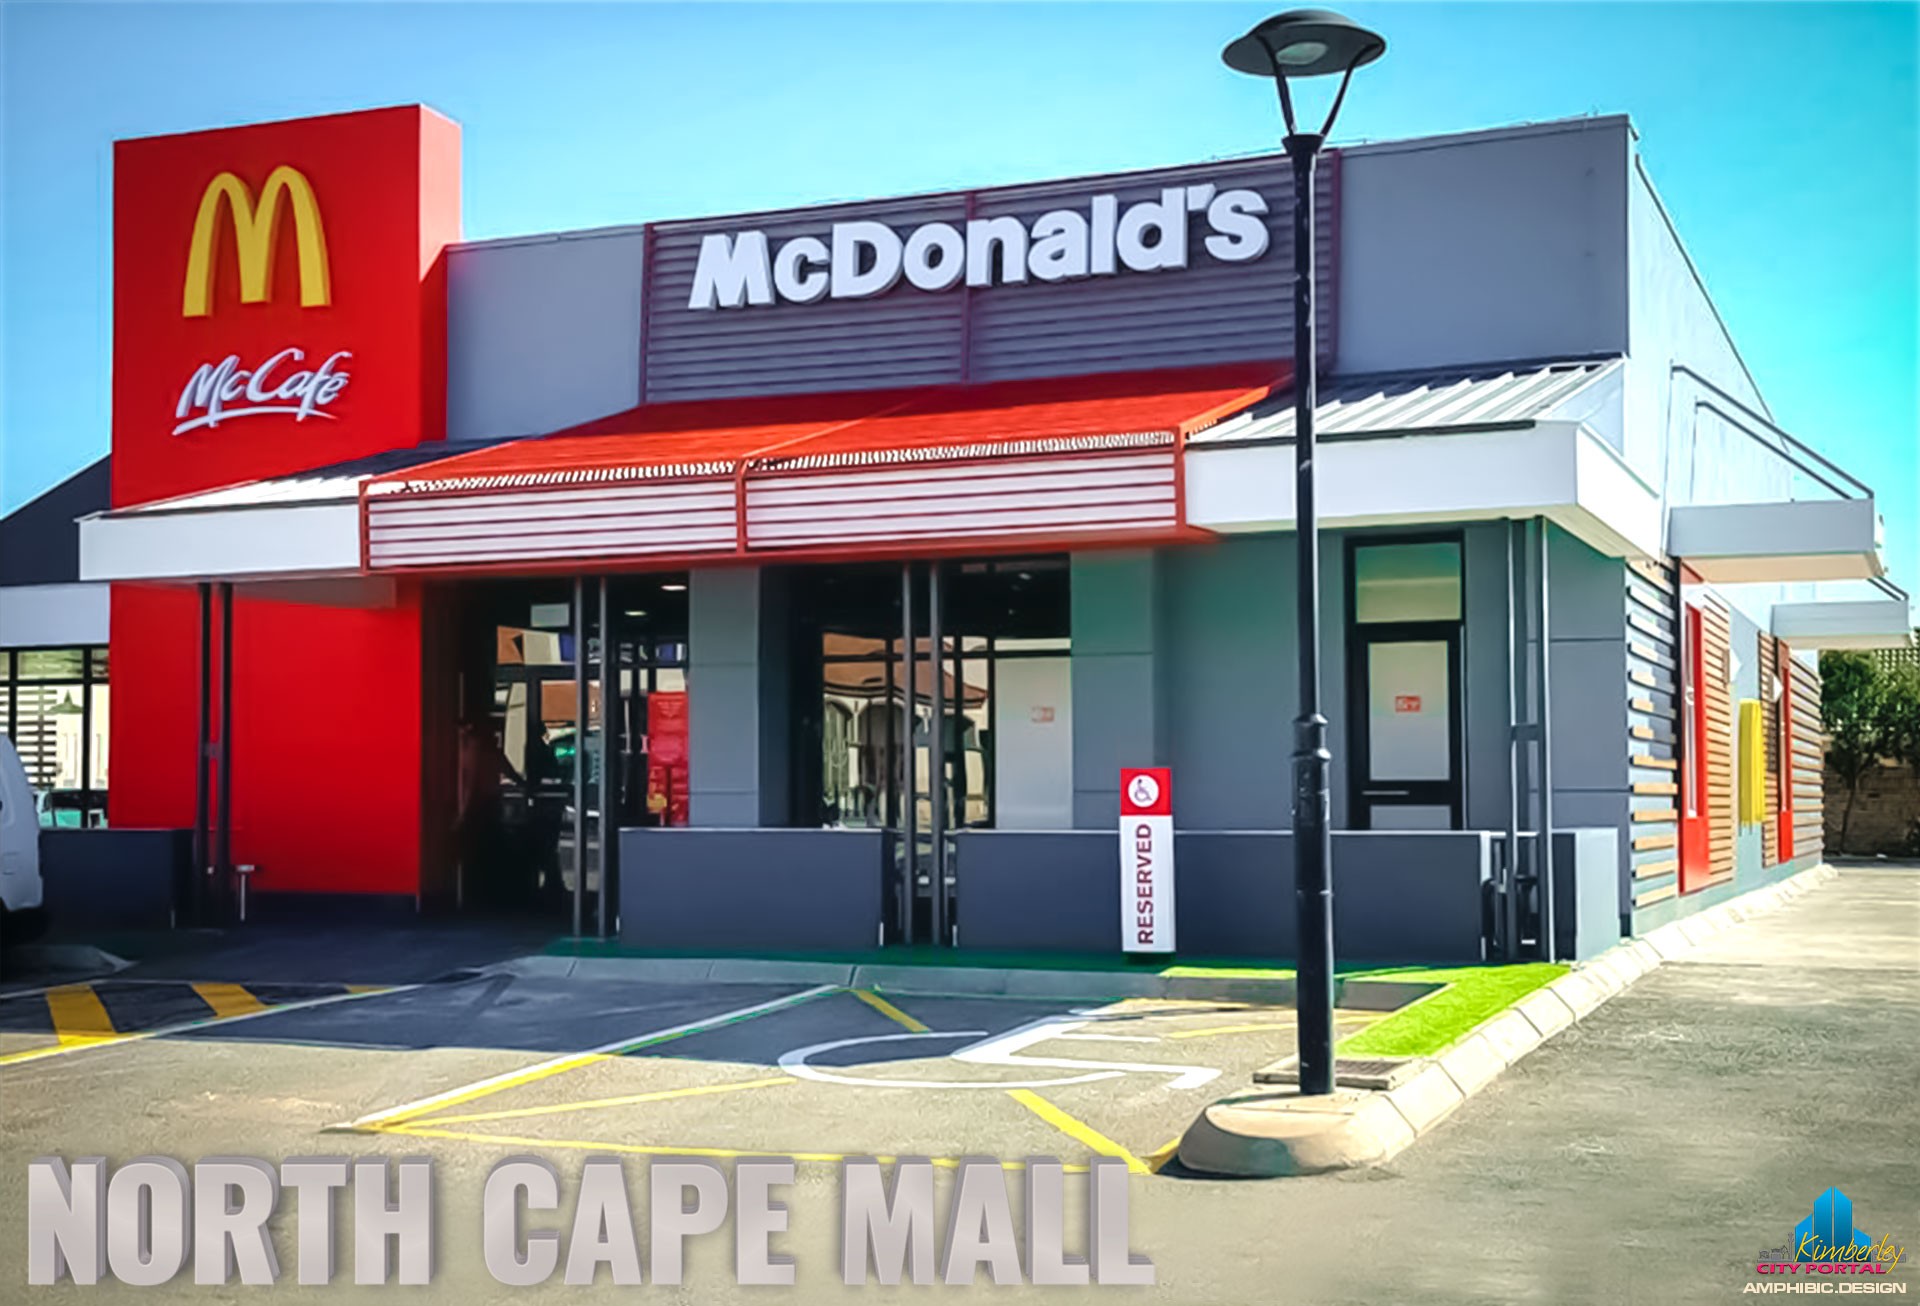 The new revamped McDonalds North Cape Mall Kimberley